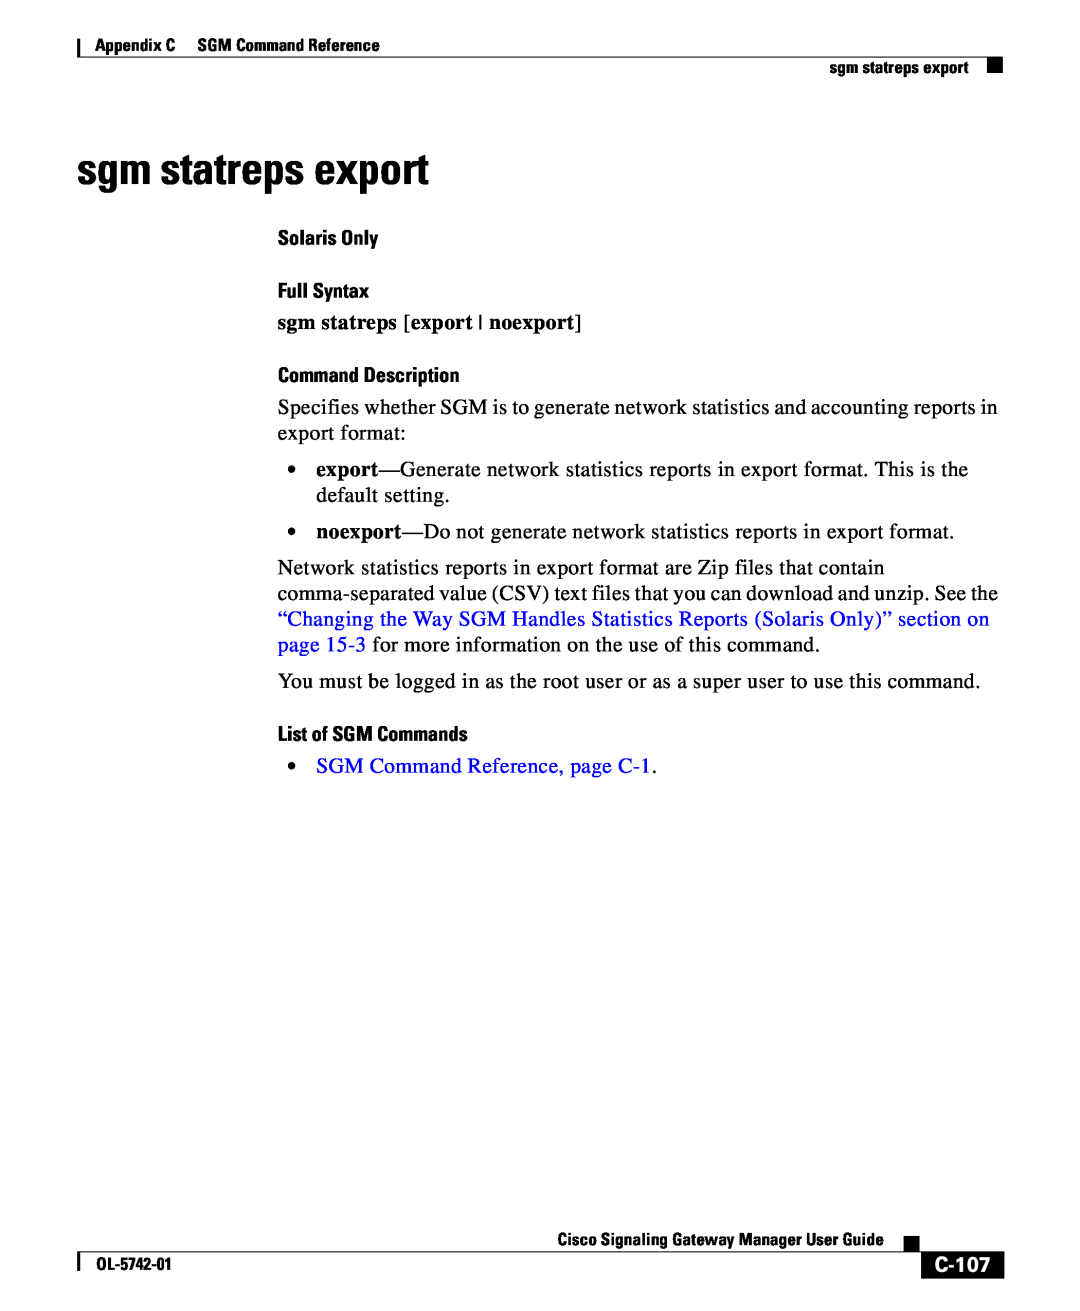 Cisco Systems OL-5742-01 sgm statreps export, C-107, Solaris Only Full Syntax, Command Description, List of SGM Commands 